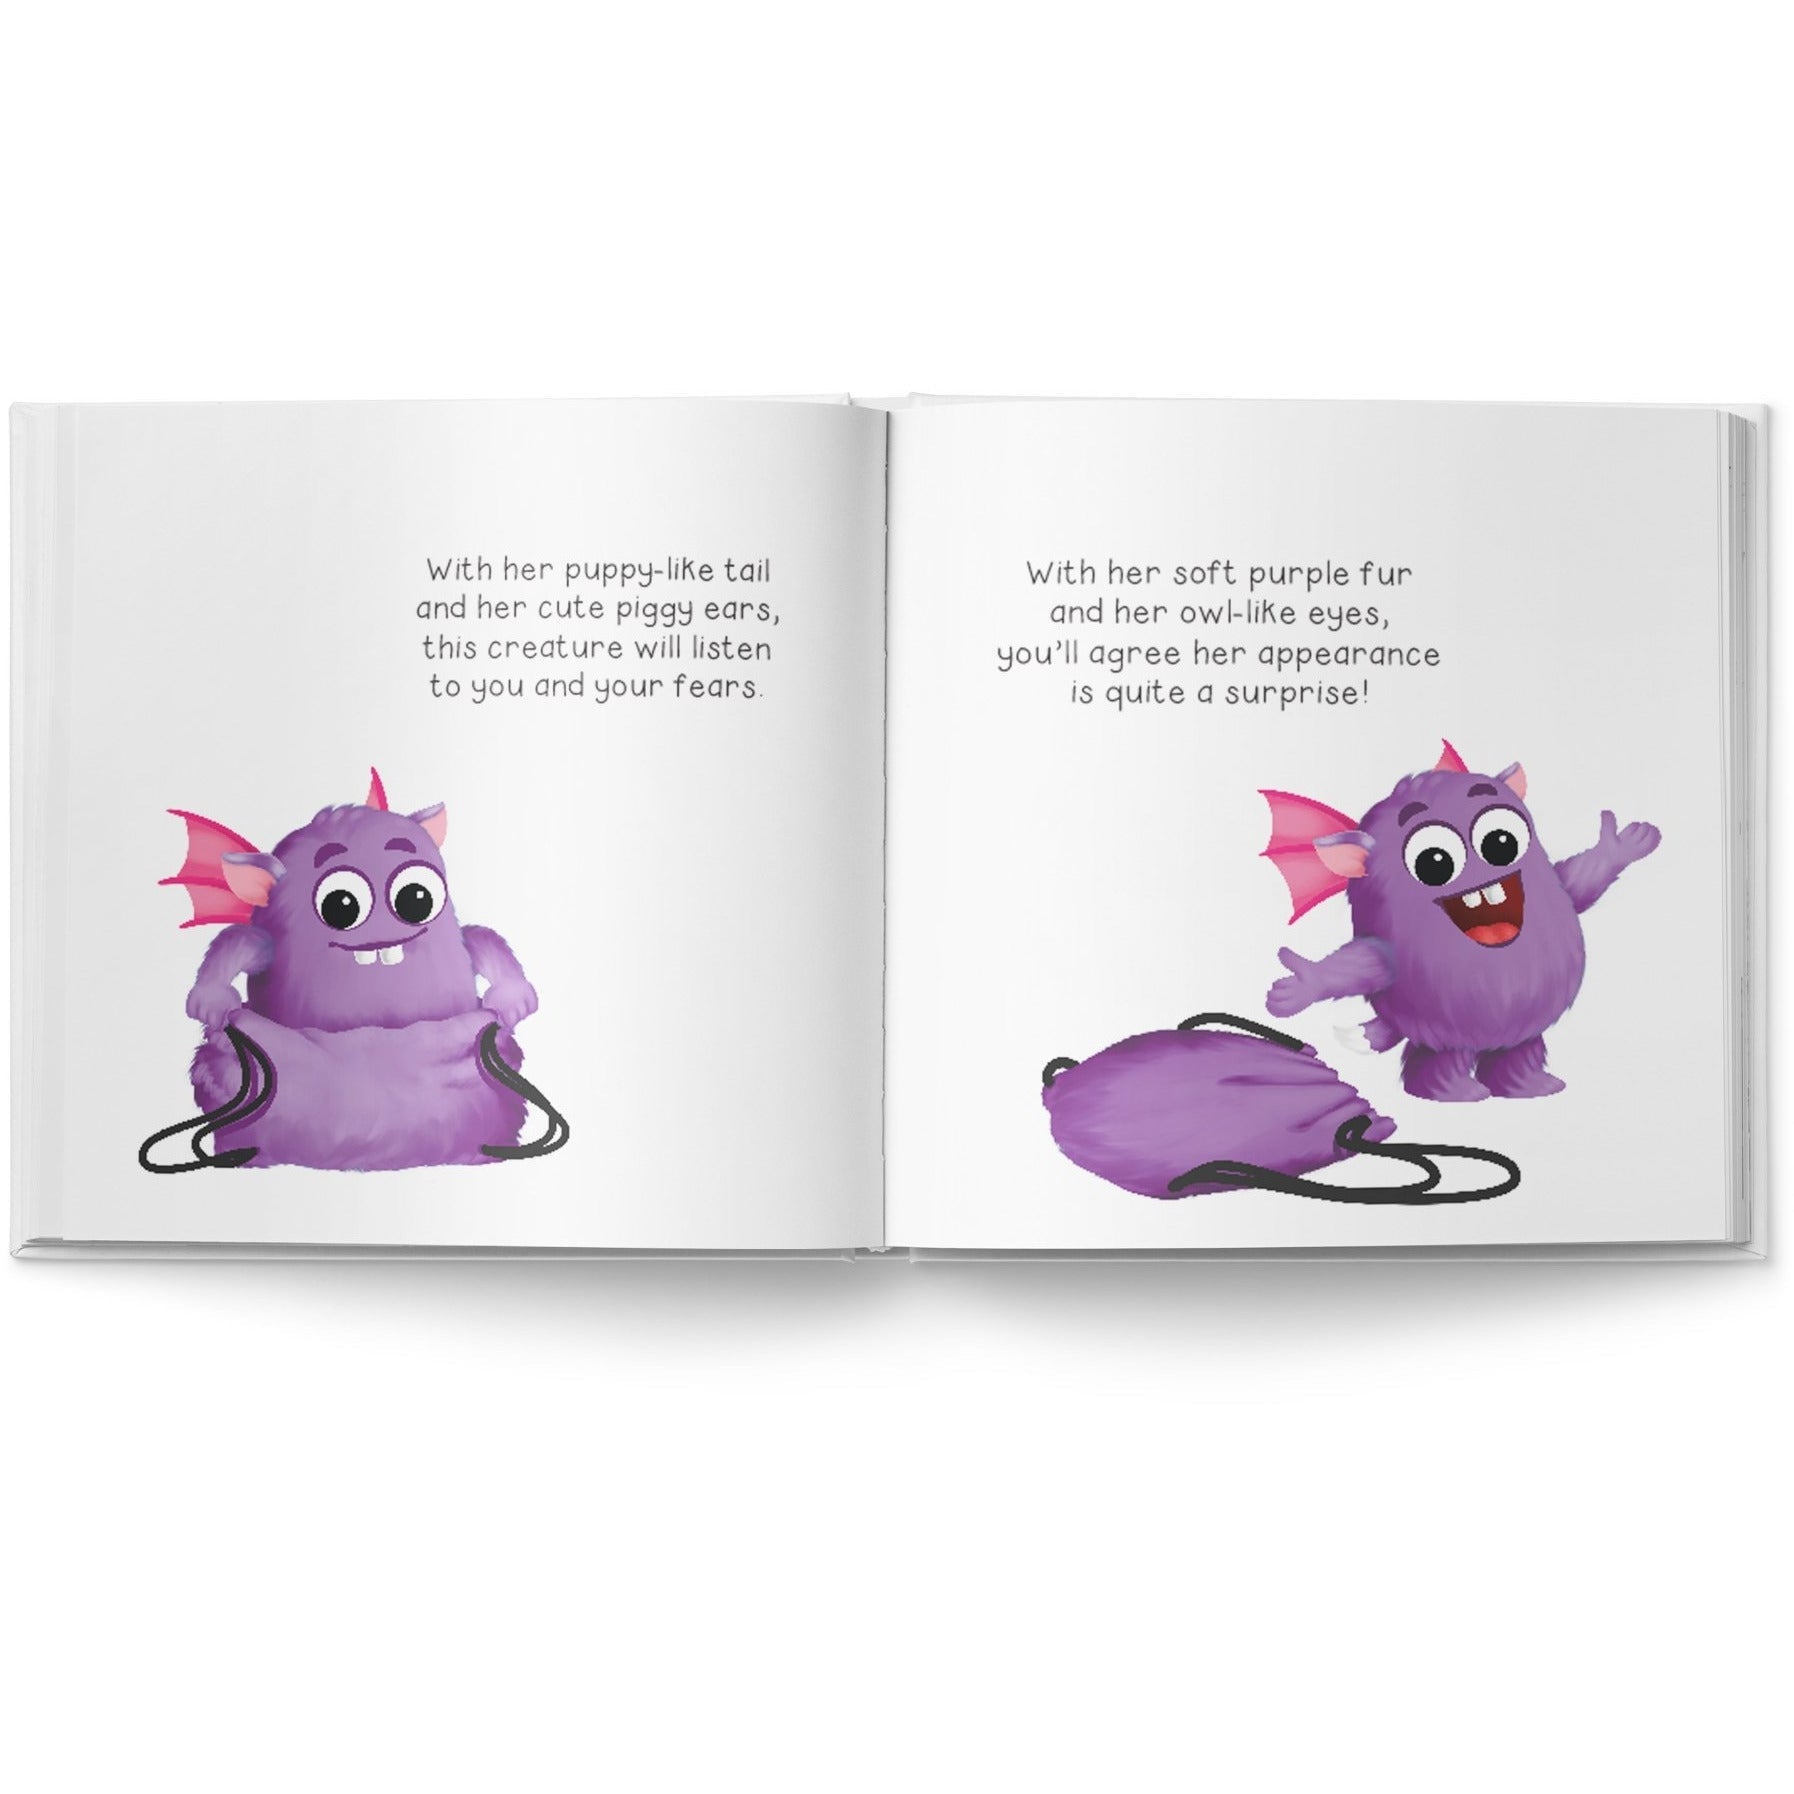 YTPC - Helps with Emotional Regulation (Hardcover) - Your Teacher's Pet Creature